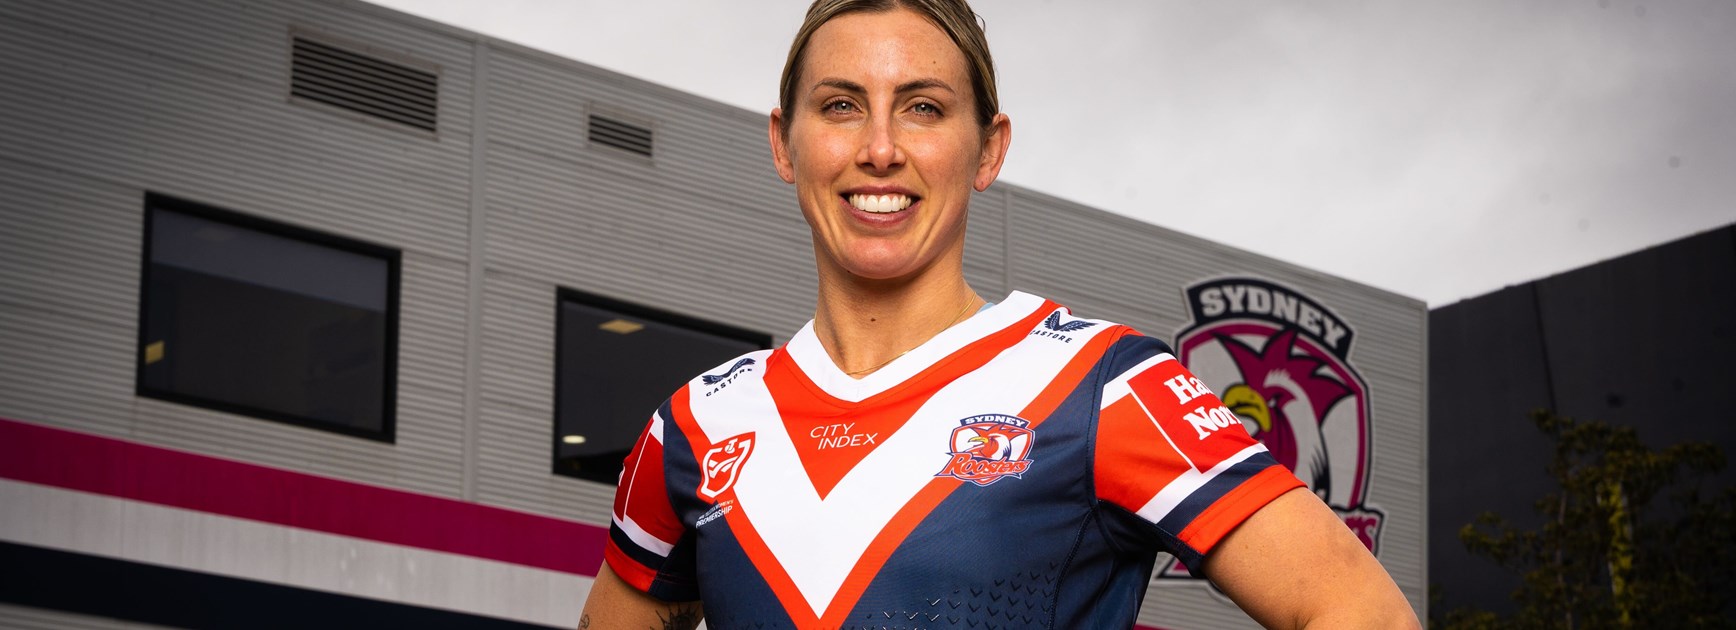 2022 NRLW Signings Tracker: Roosters sign Bremner, Taylor; Dragons add five